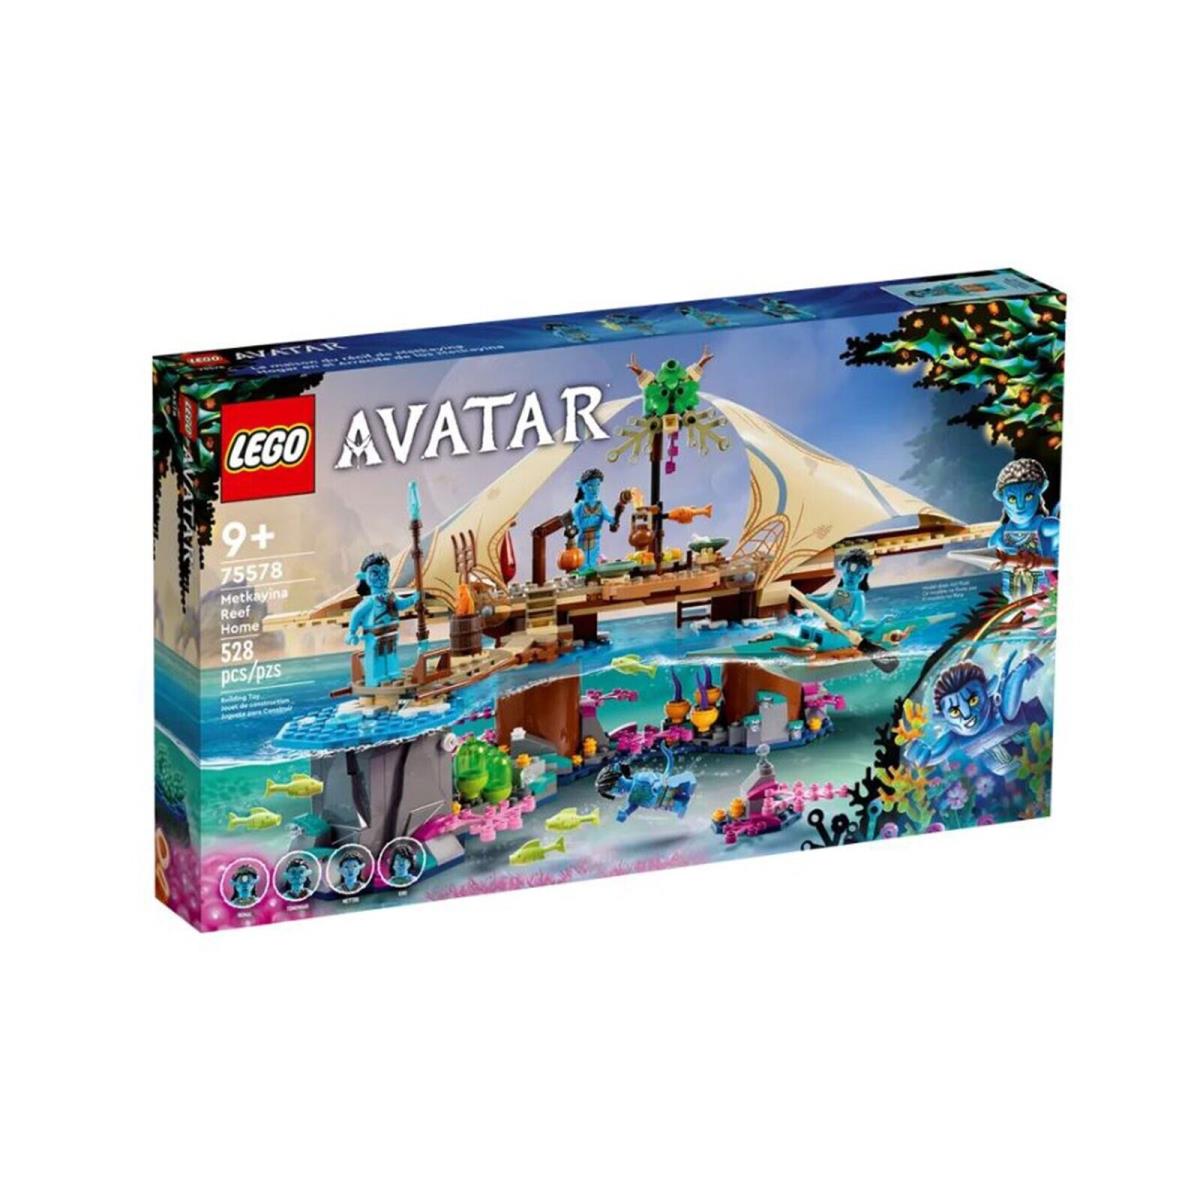 Lego Avatar: The Way of Water Metkayina Reef Home Toy Set 75578 See Details